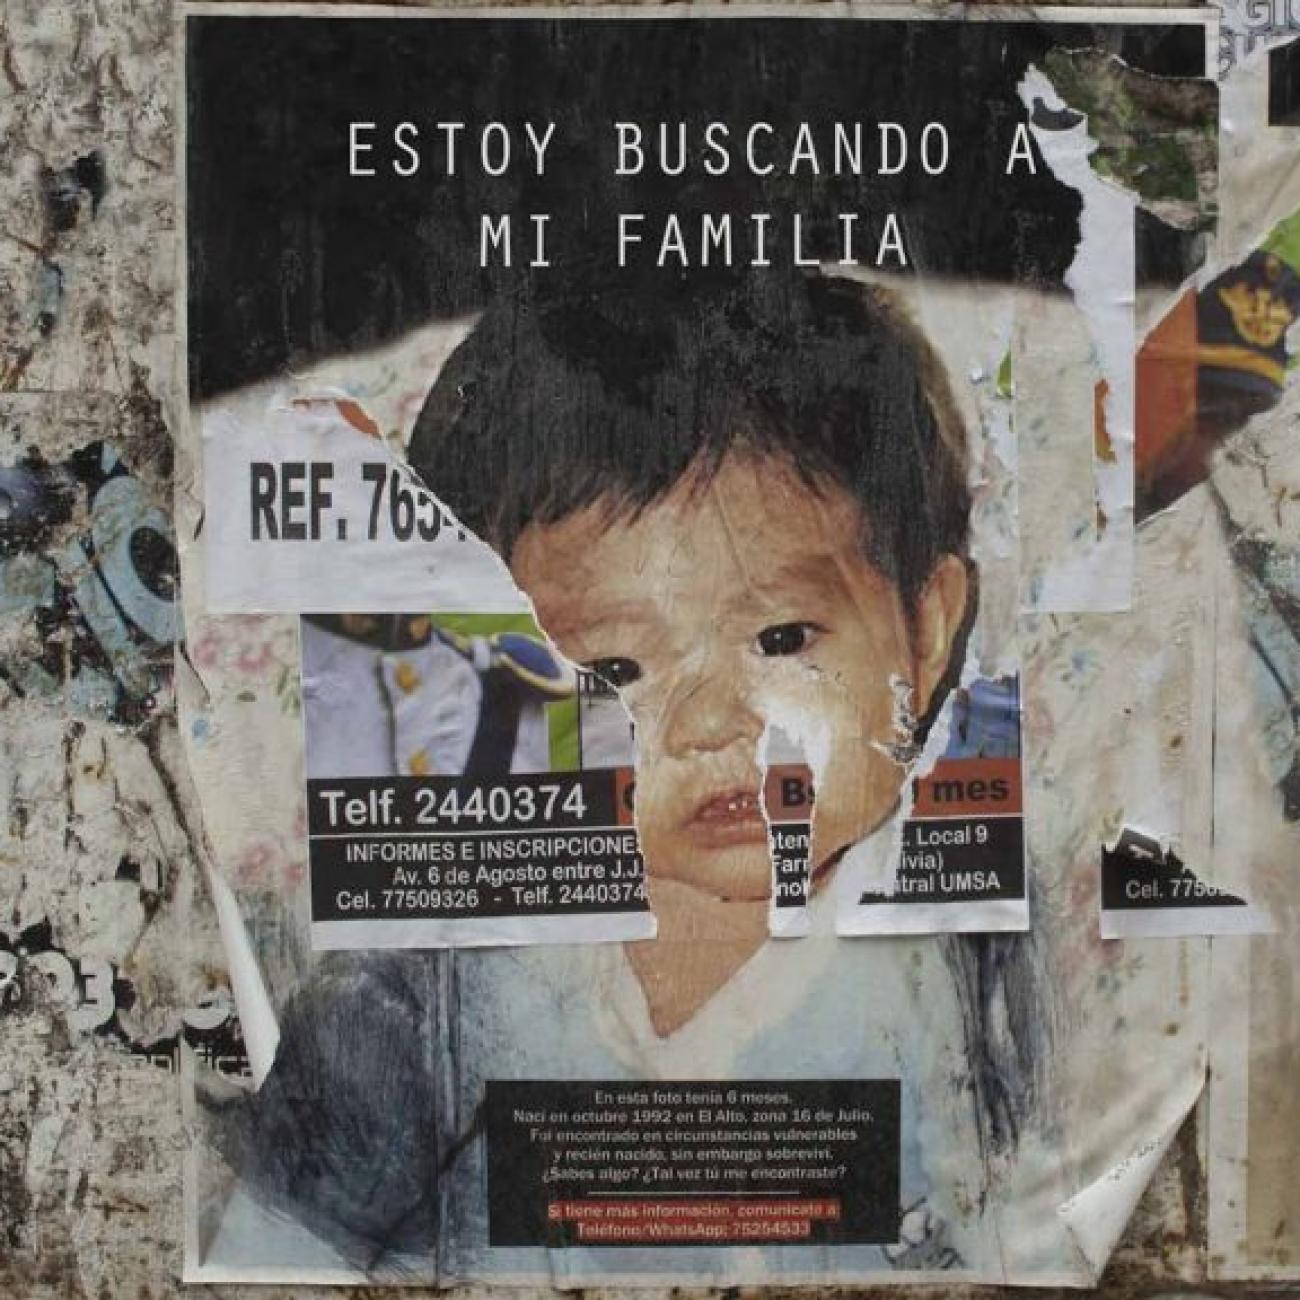 A poster of an infant reading Estoy Buscando A Mi Familia, or "I’m looking for my family"